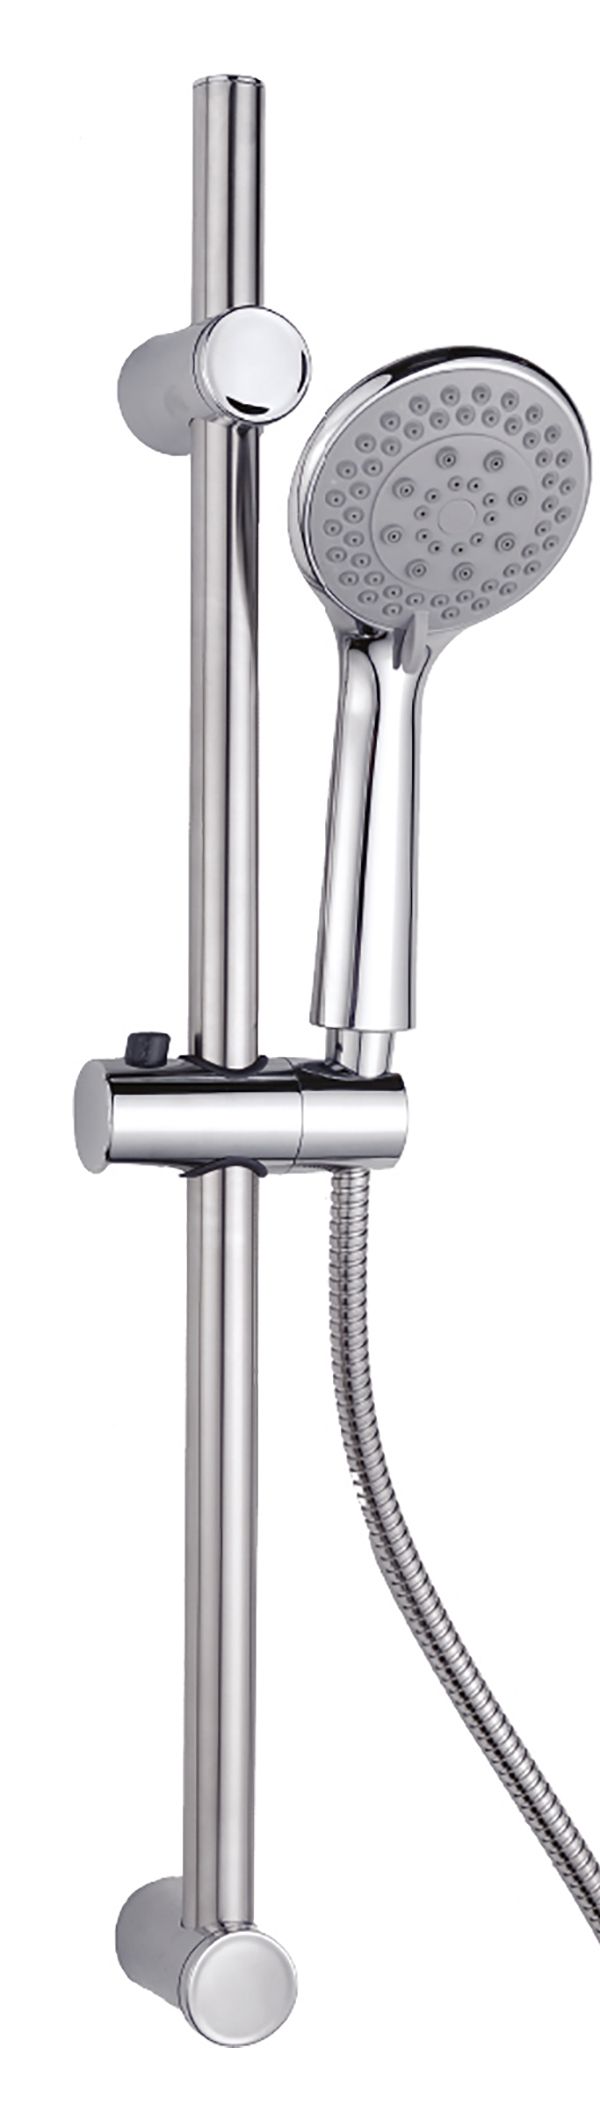 Wickes 5 Function Shower Set - Chrome